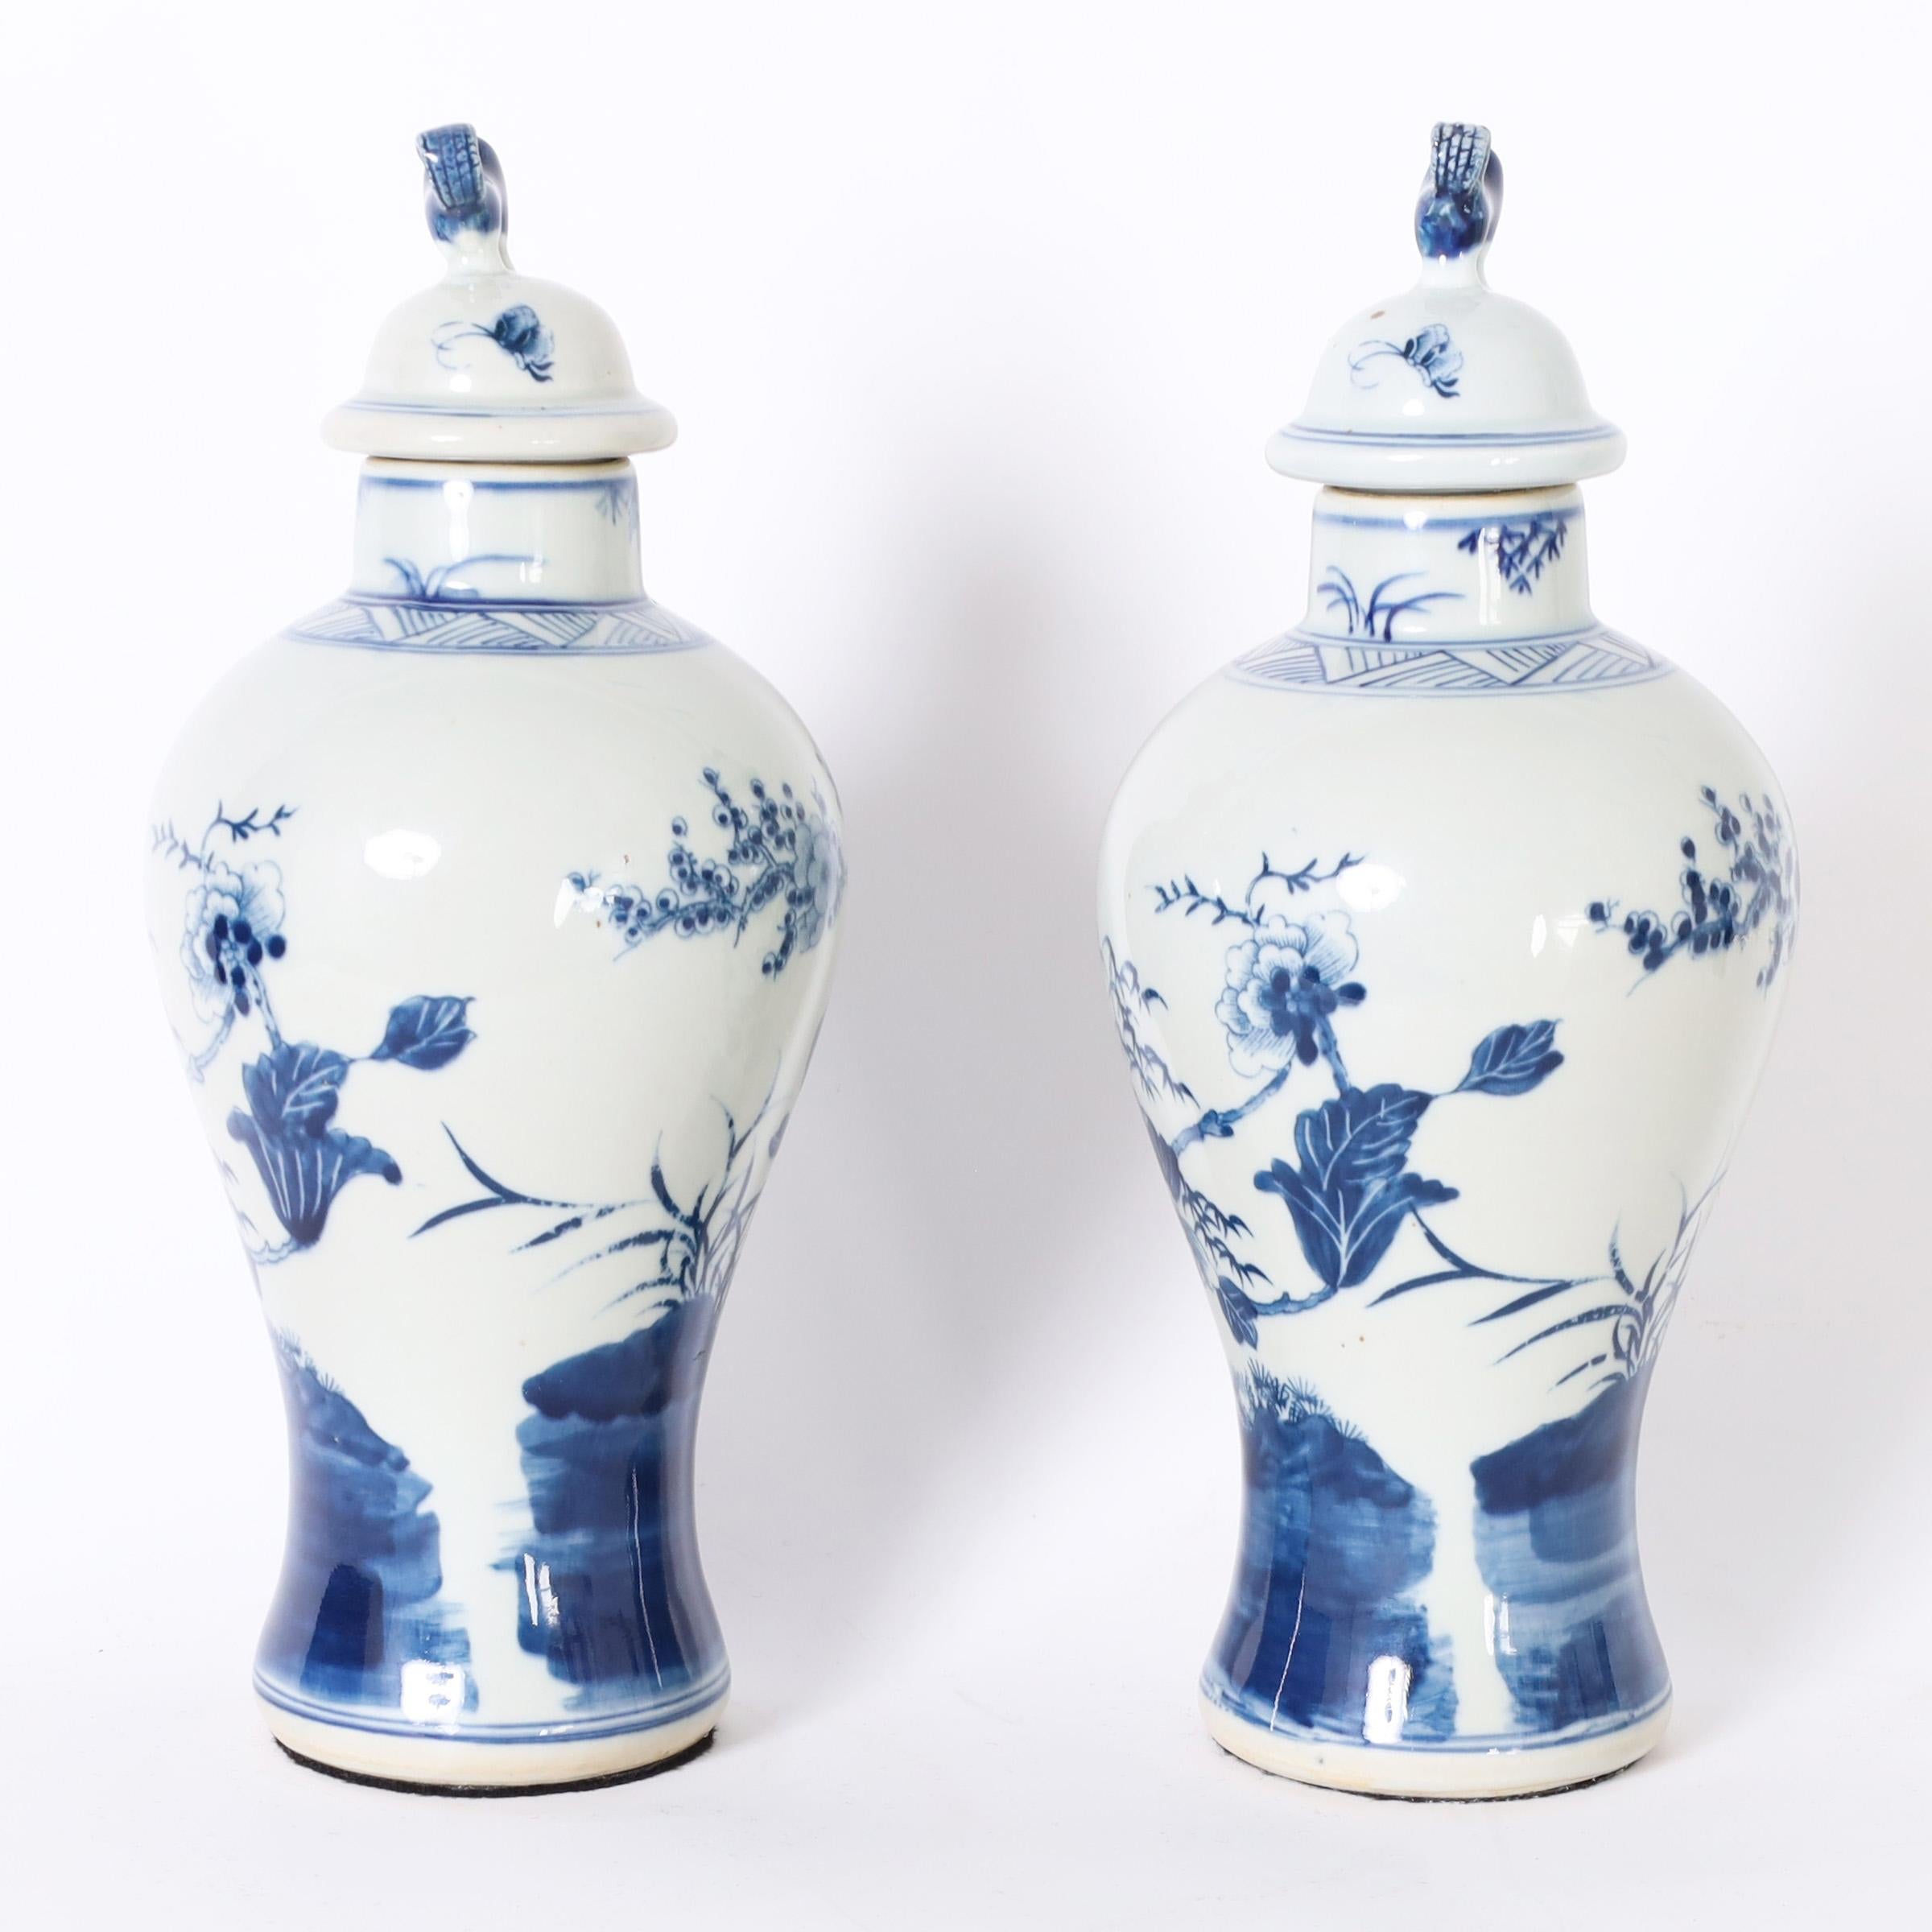 Lofty pair of Chinese blue and white lidded urns with classic form hand decorated with trees and flowers.